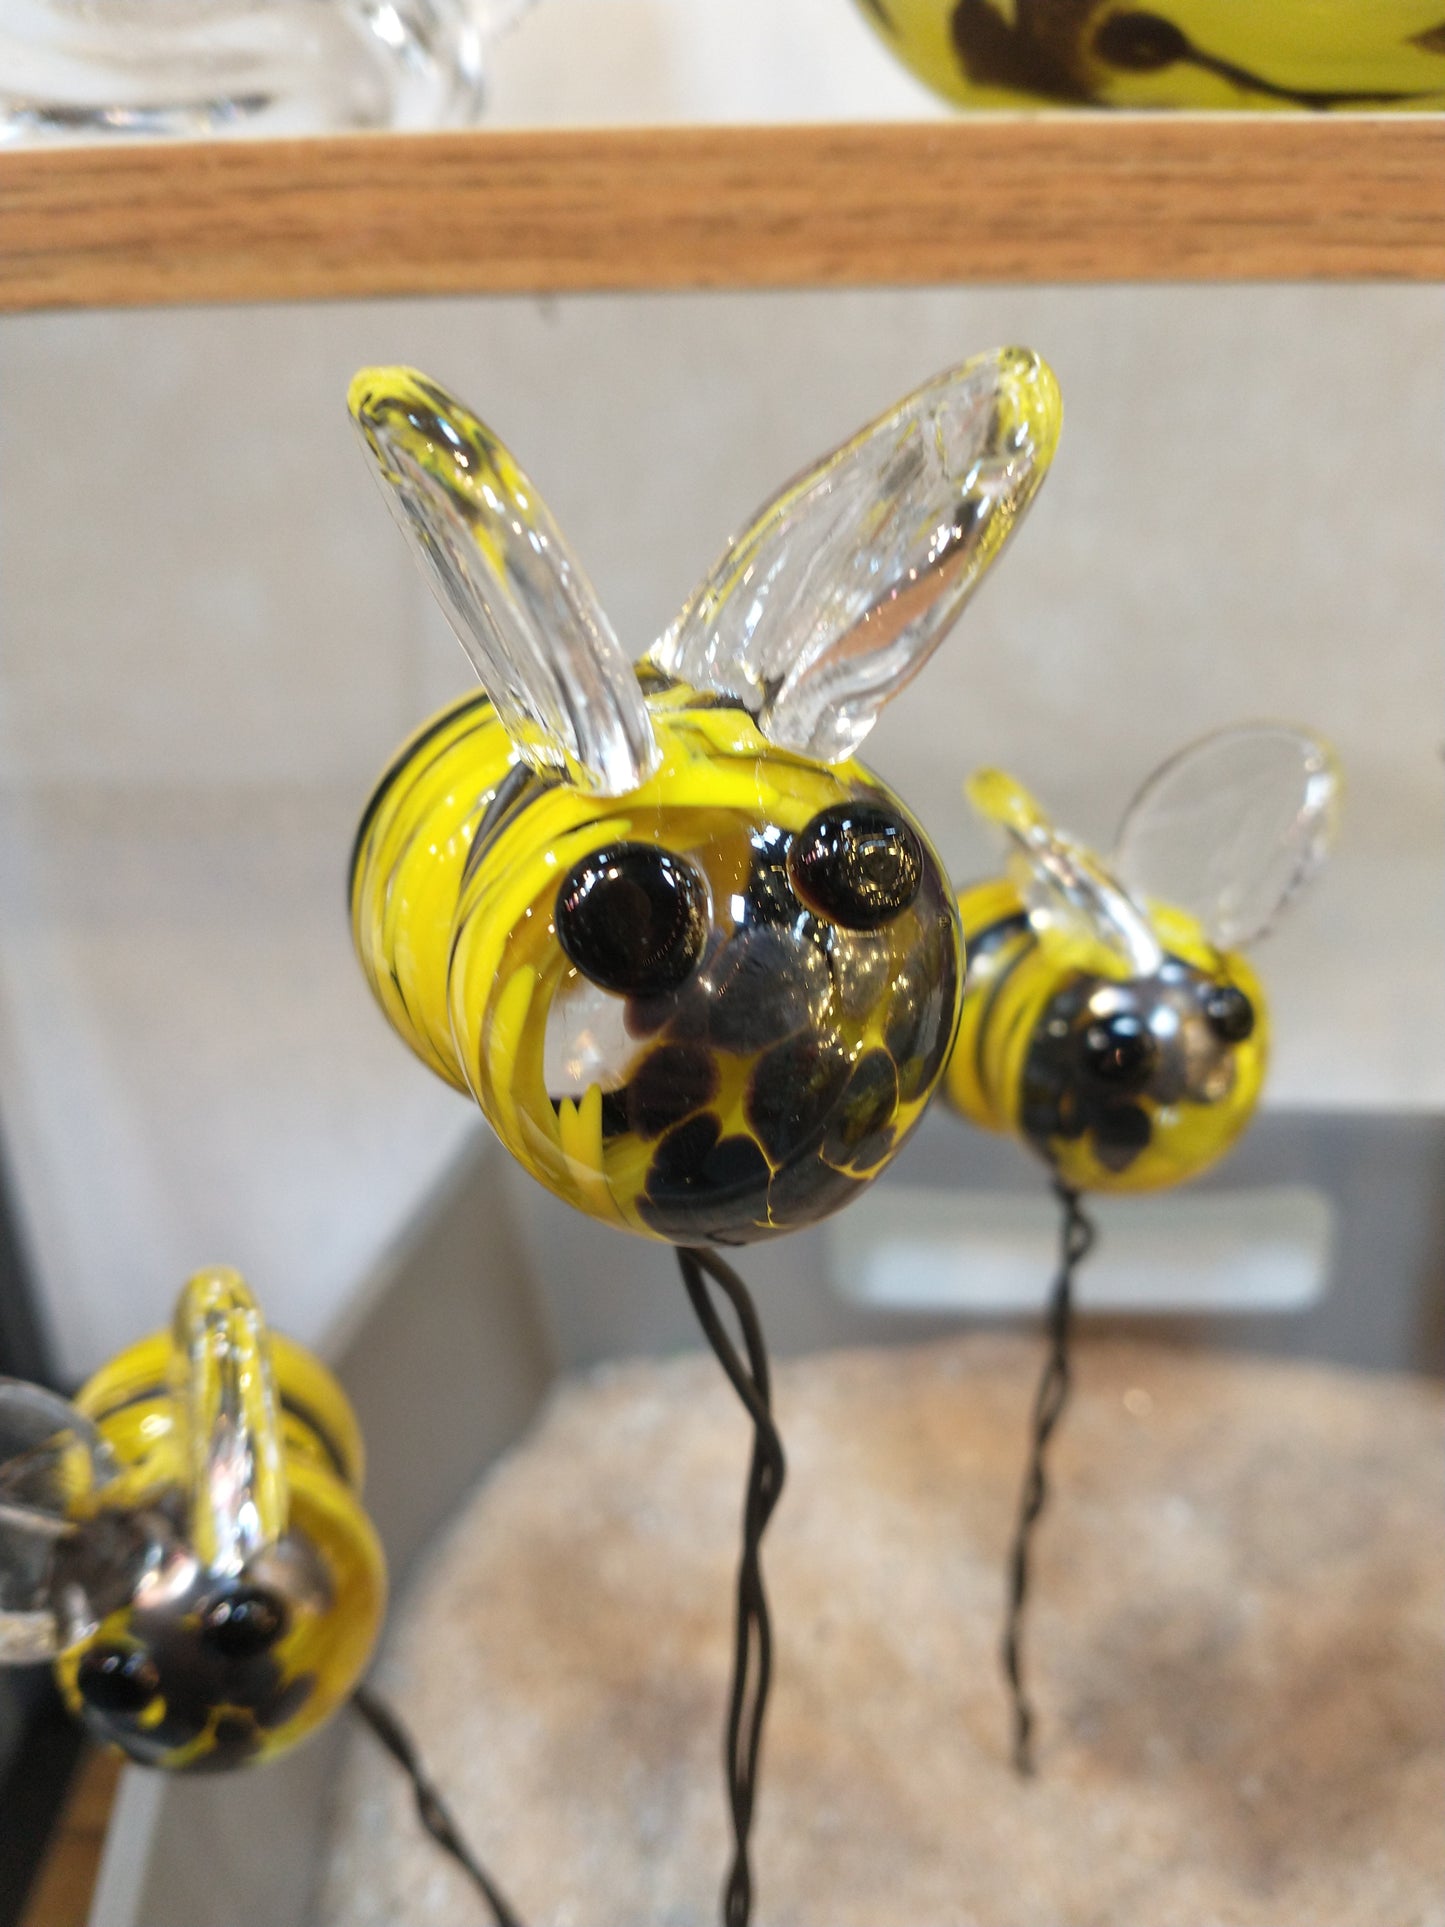 Glass Bee SINGLE Mini Planter Bees bumble bees small glass bees honey bees hand blown glass figurines glass planter decoration garden plants (Copy)